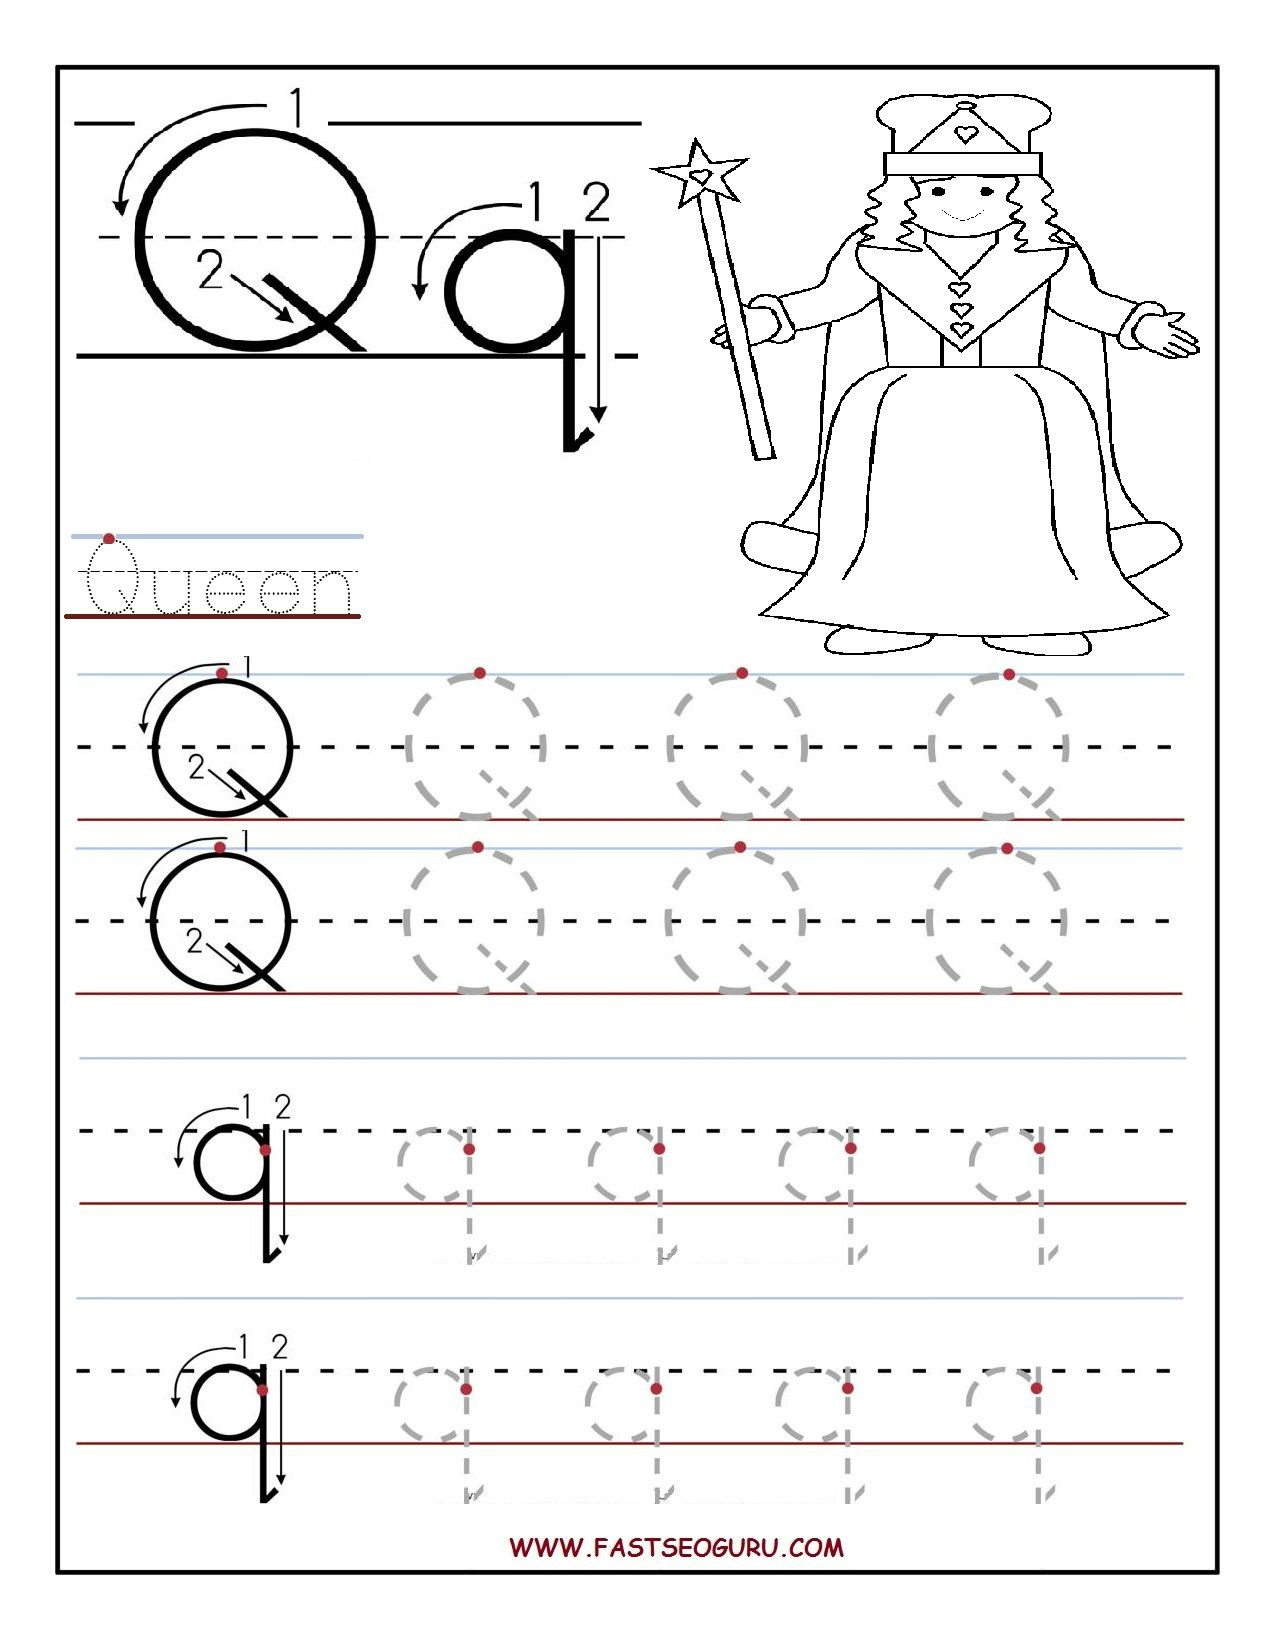 Printable Letter Q Tracing Worksheets For Preschool throughout Letter Tracing Worksheets Toddlers